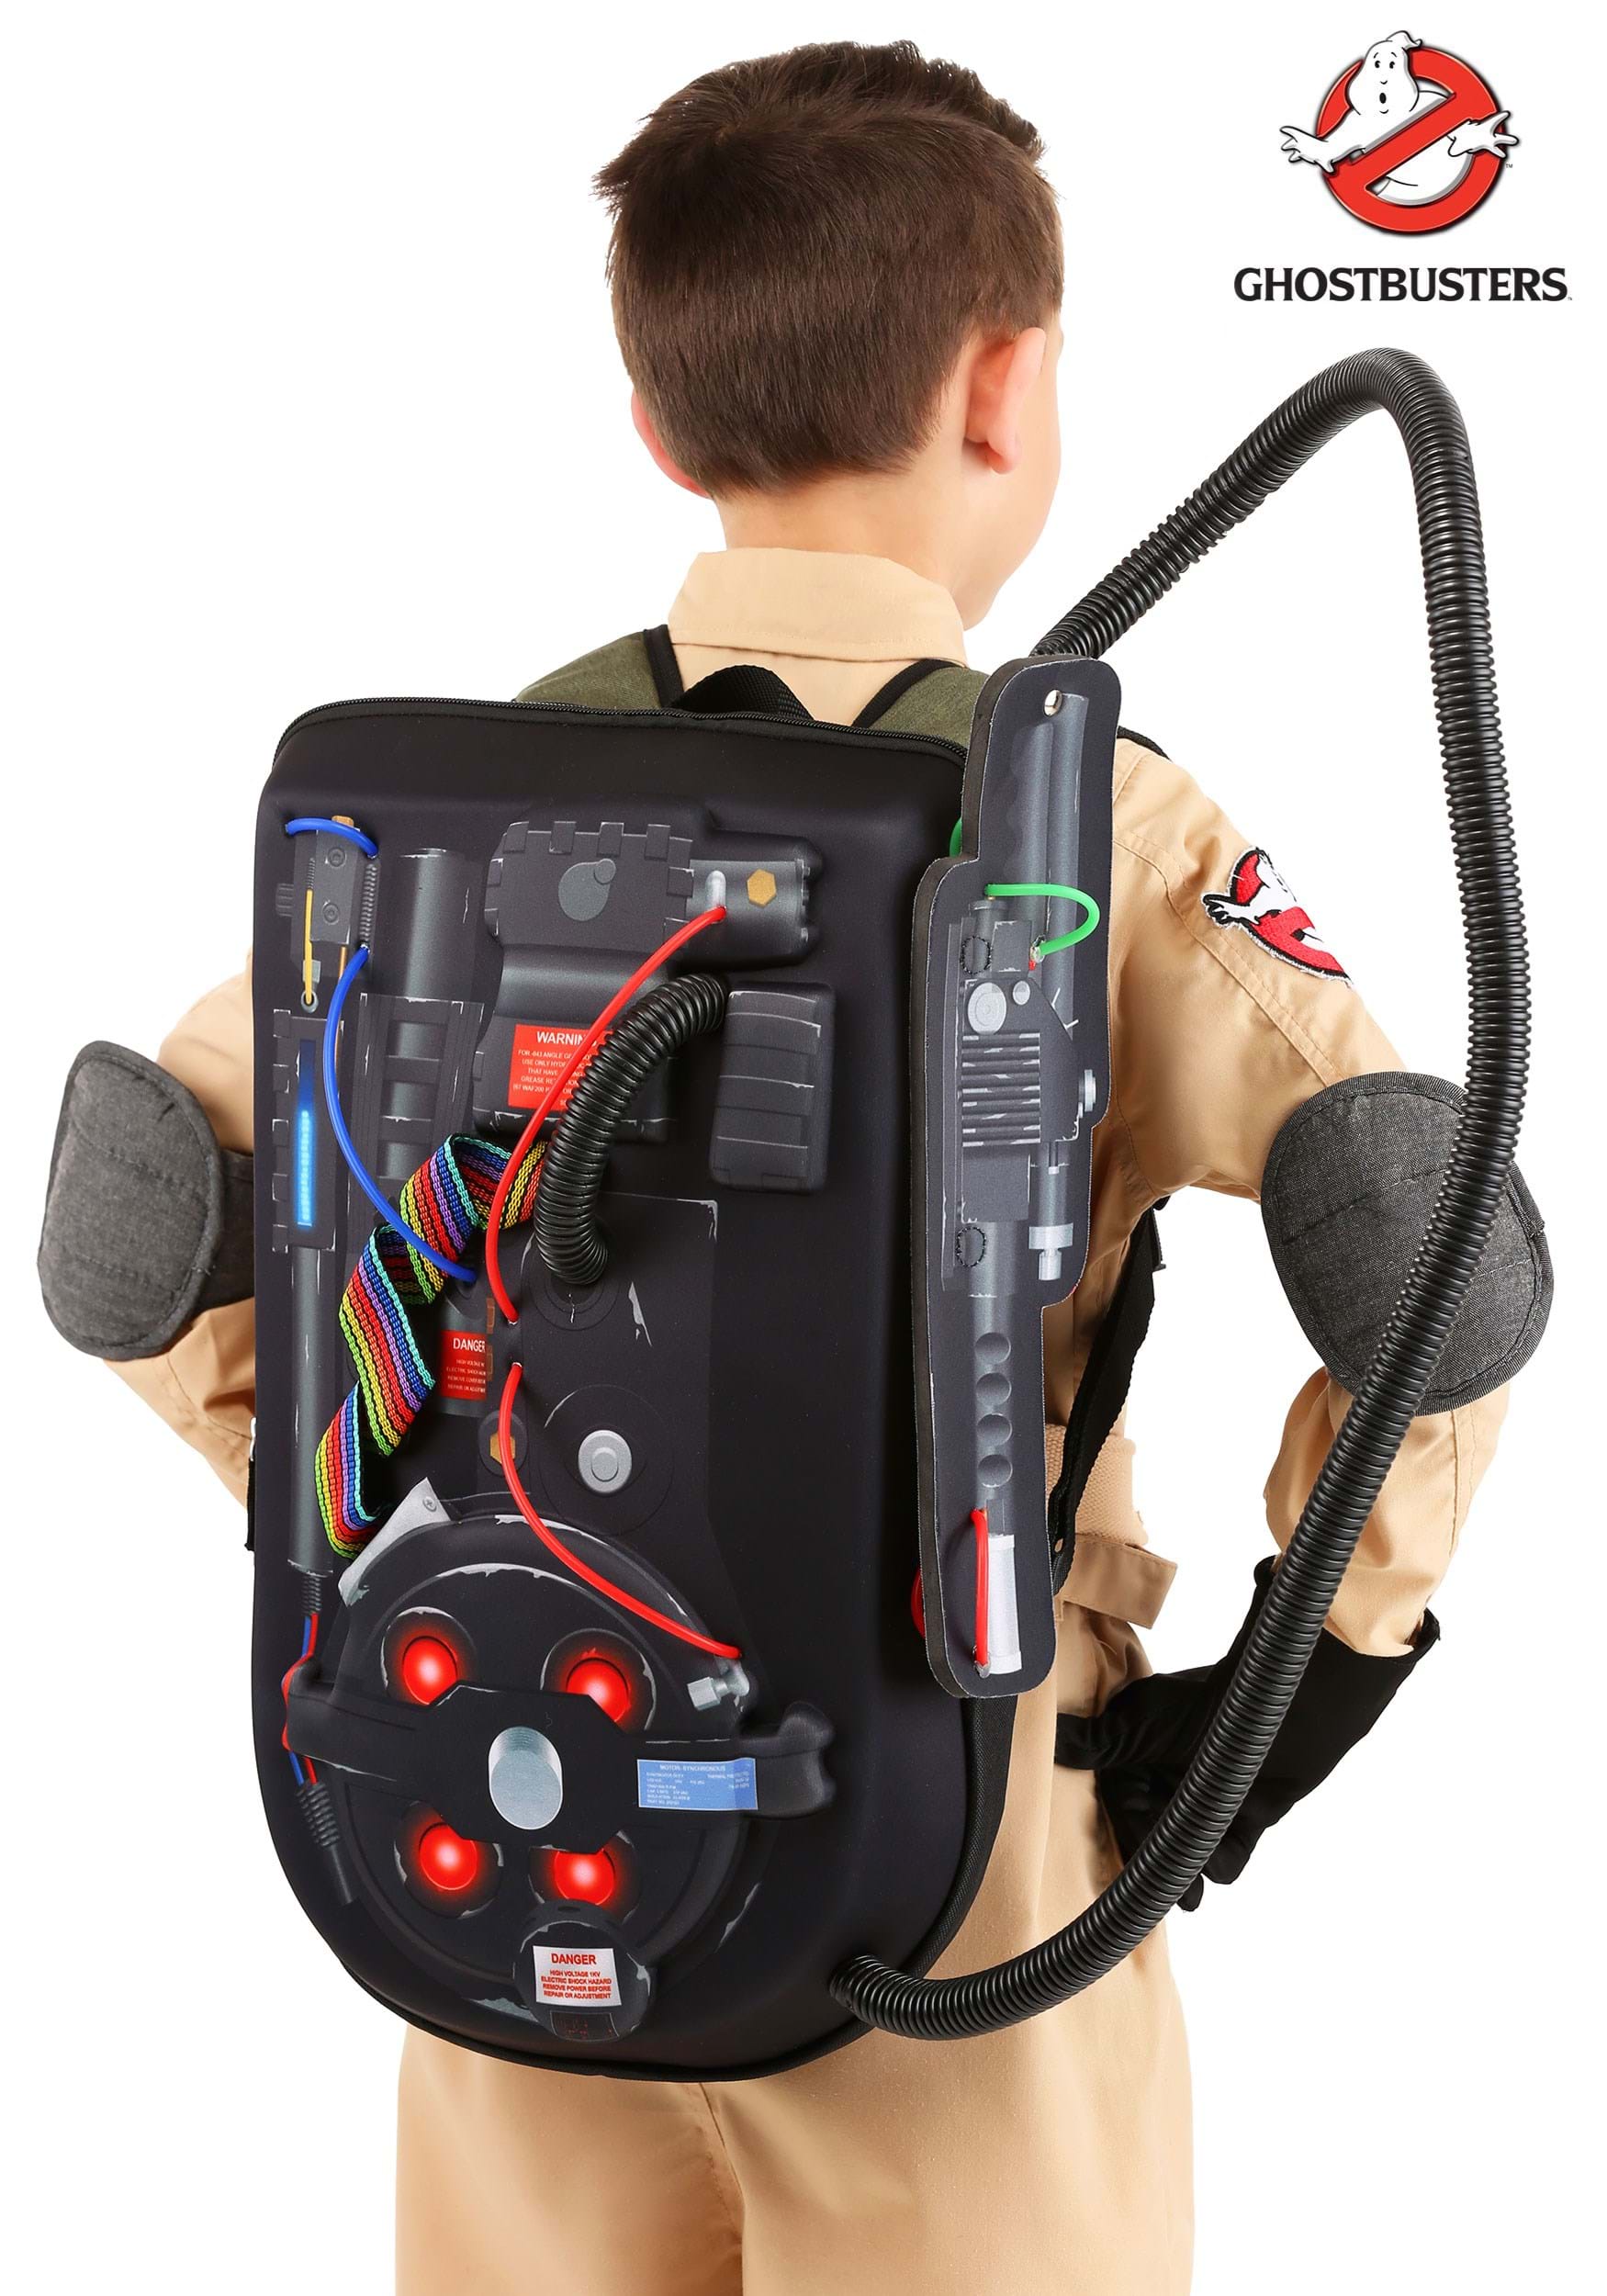 Ghostbusters Cosplay Proton Pack With Wand For Kids